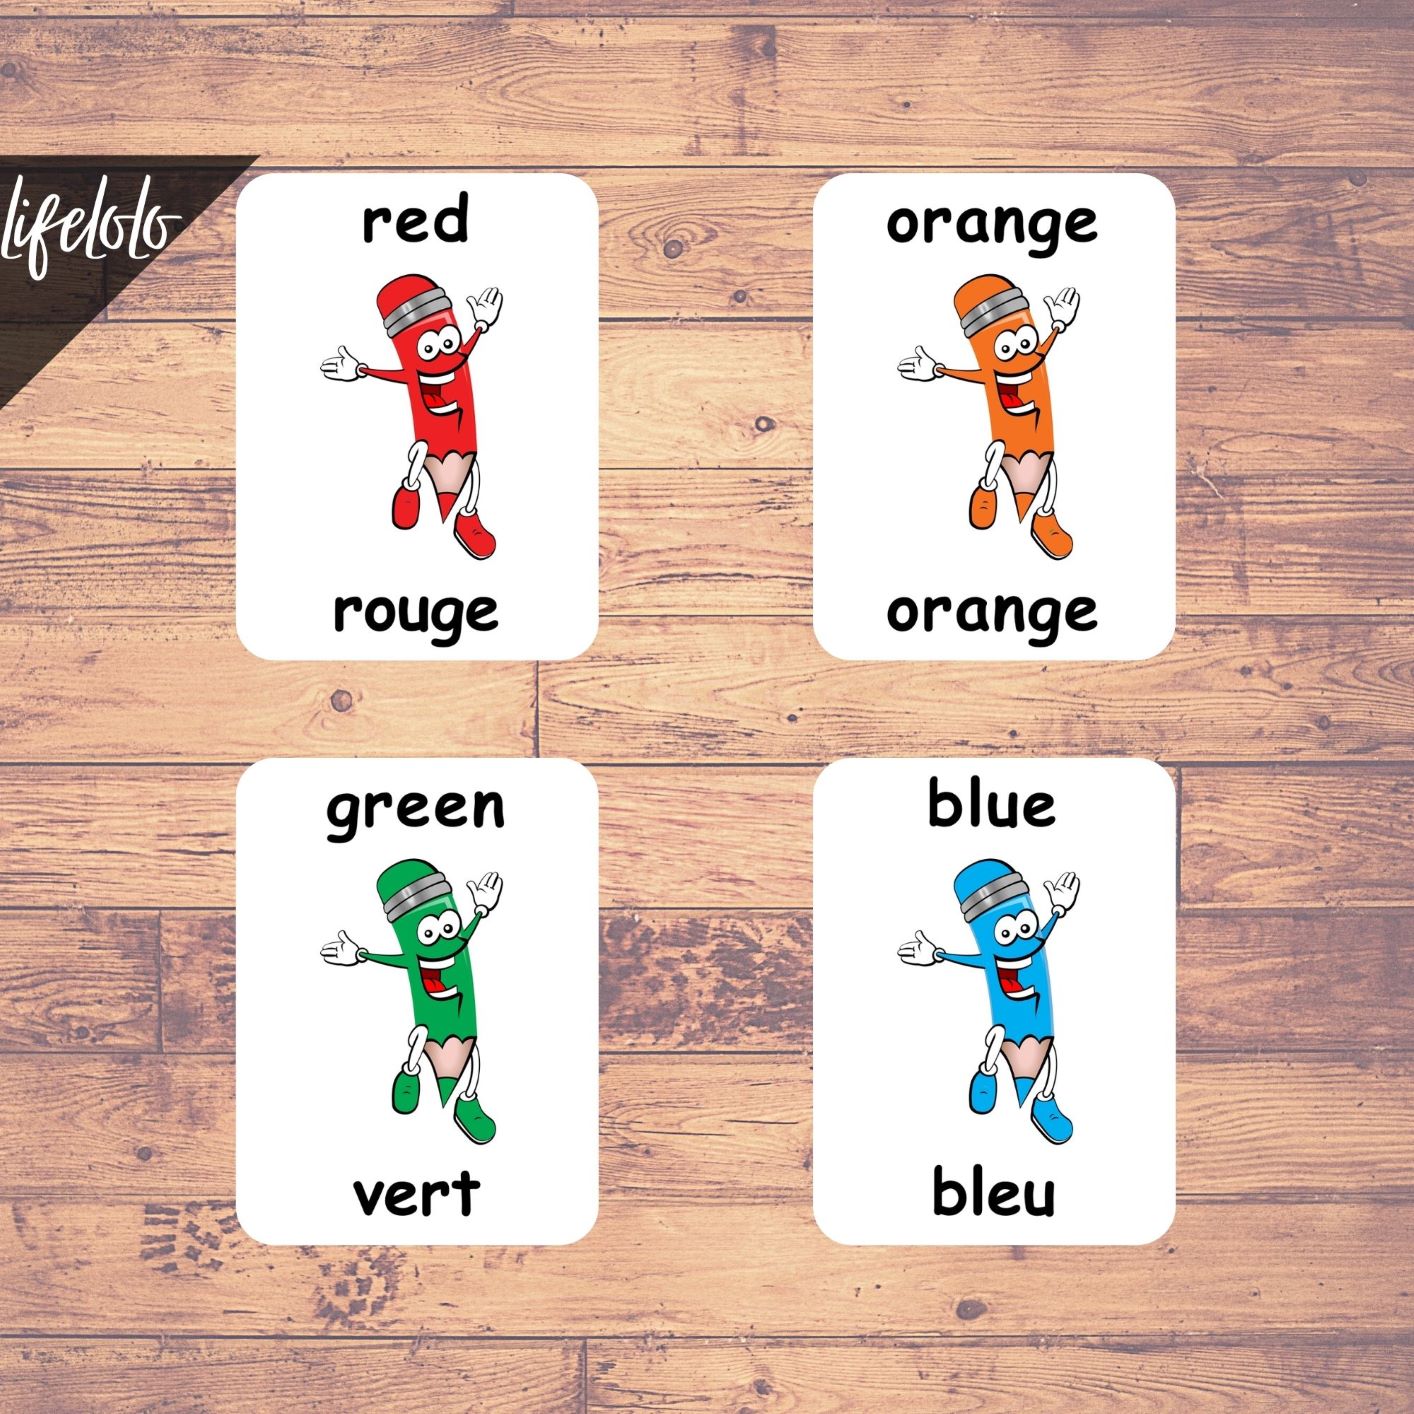 colors-french-flash-cards-bilingual-homeschool-printable-french